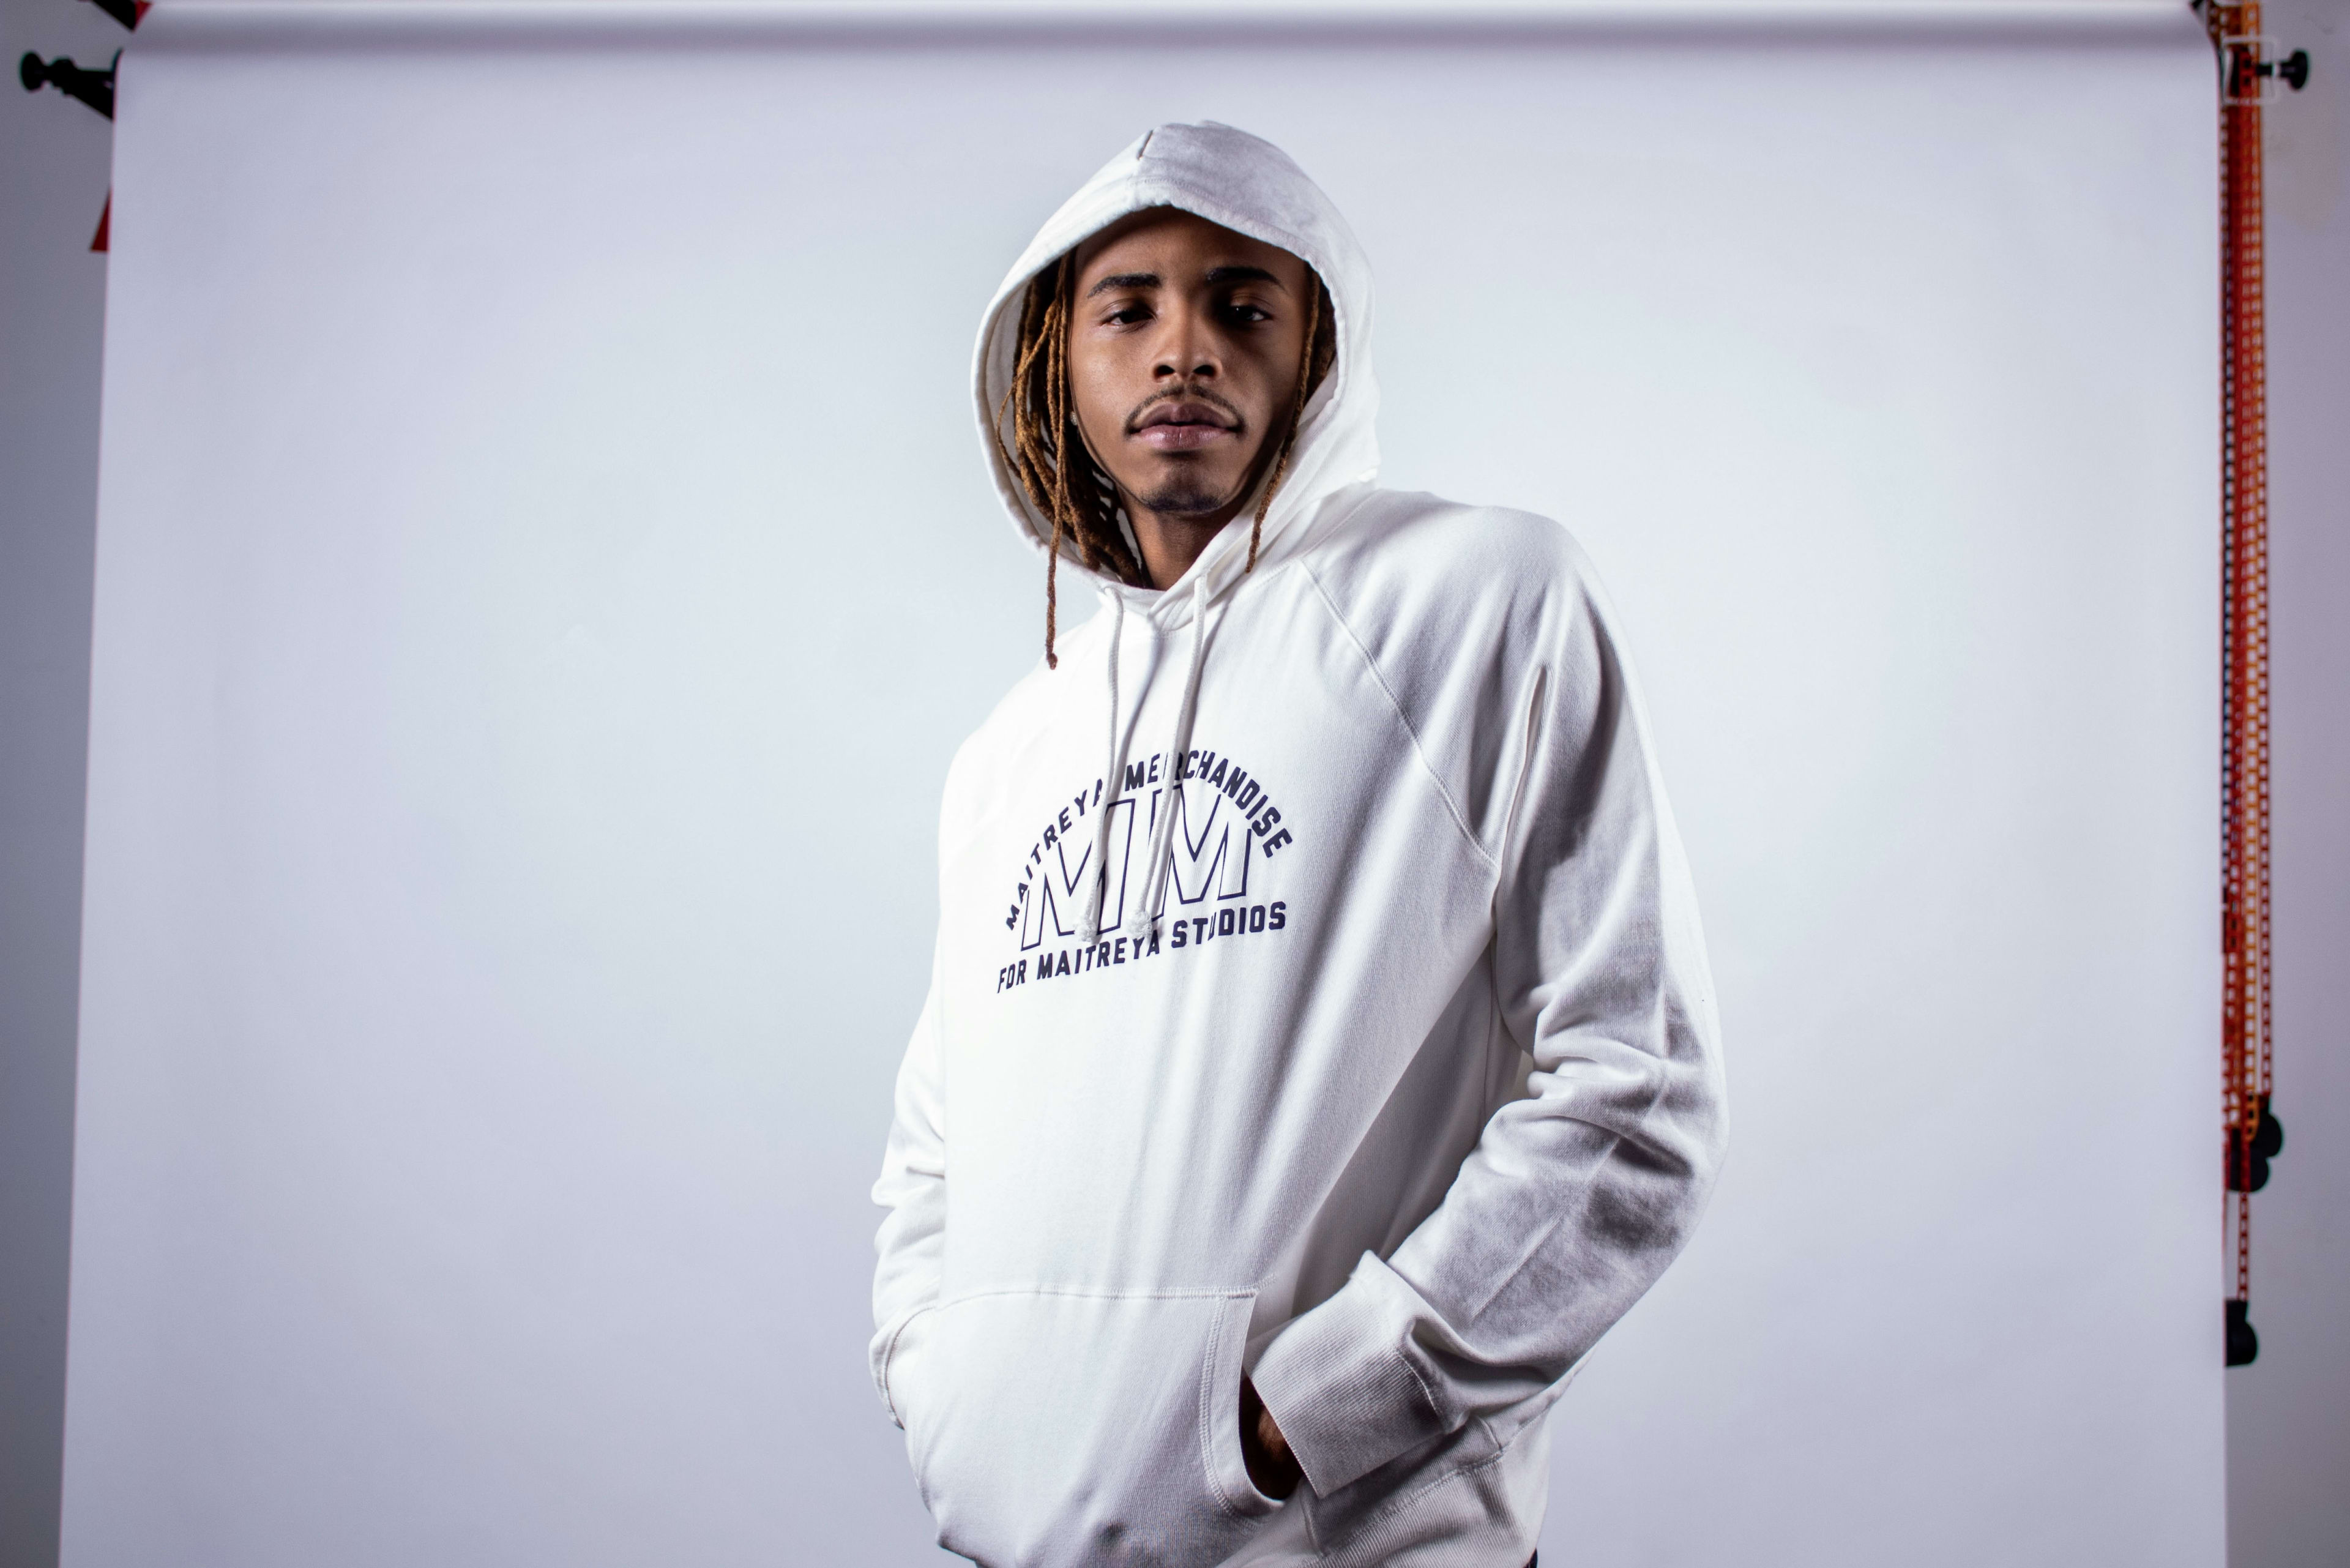 A man in a white hoodie during a photoshoot.